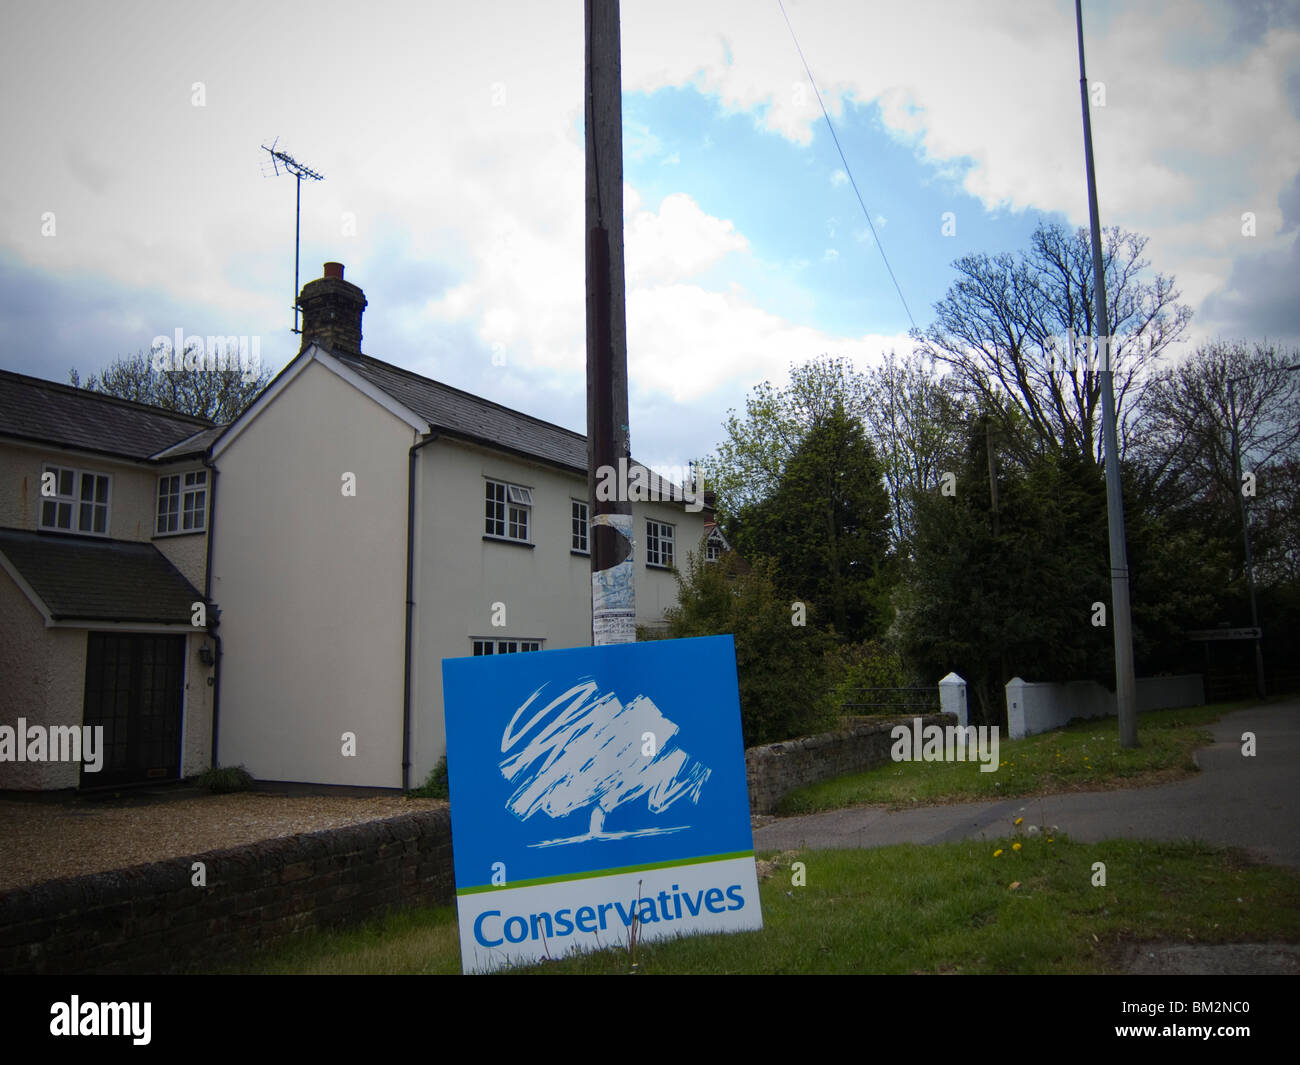 Conservative Party Board for the 2010 General Election Stock Photo